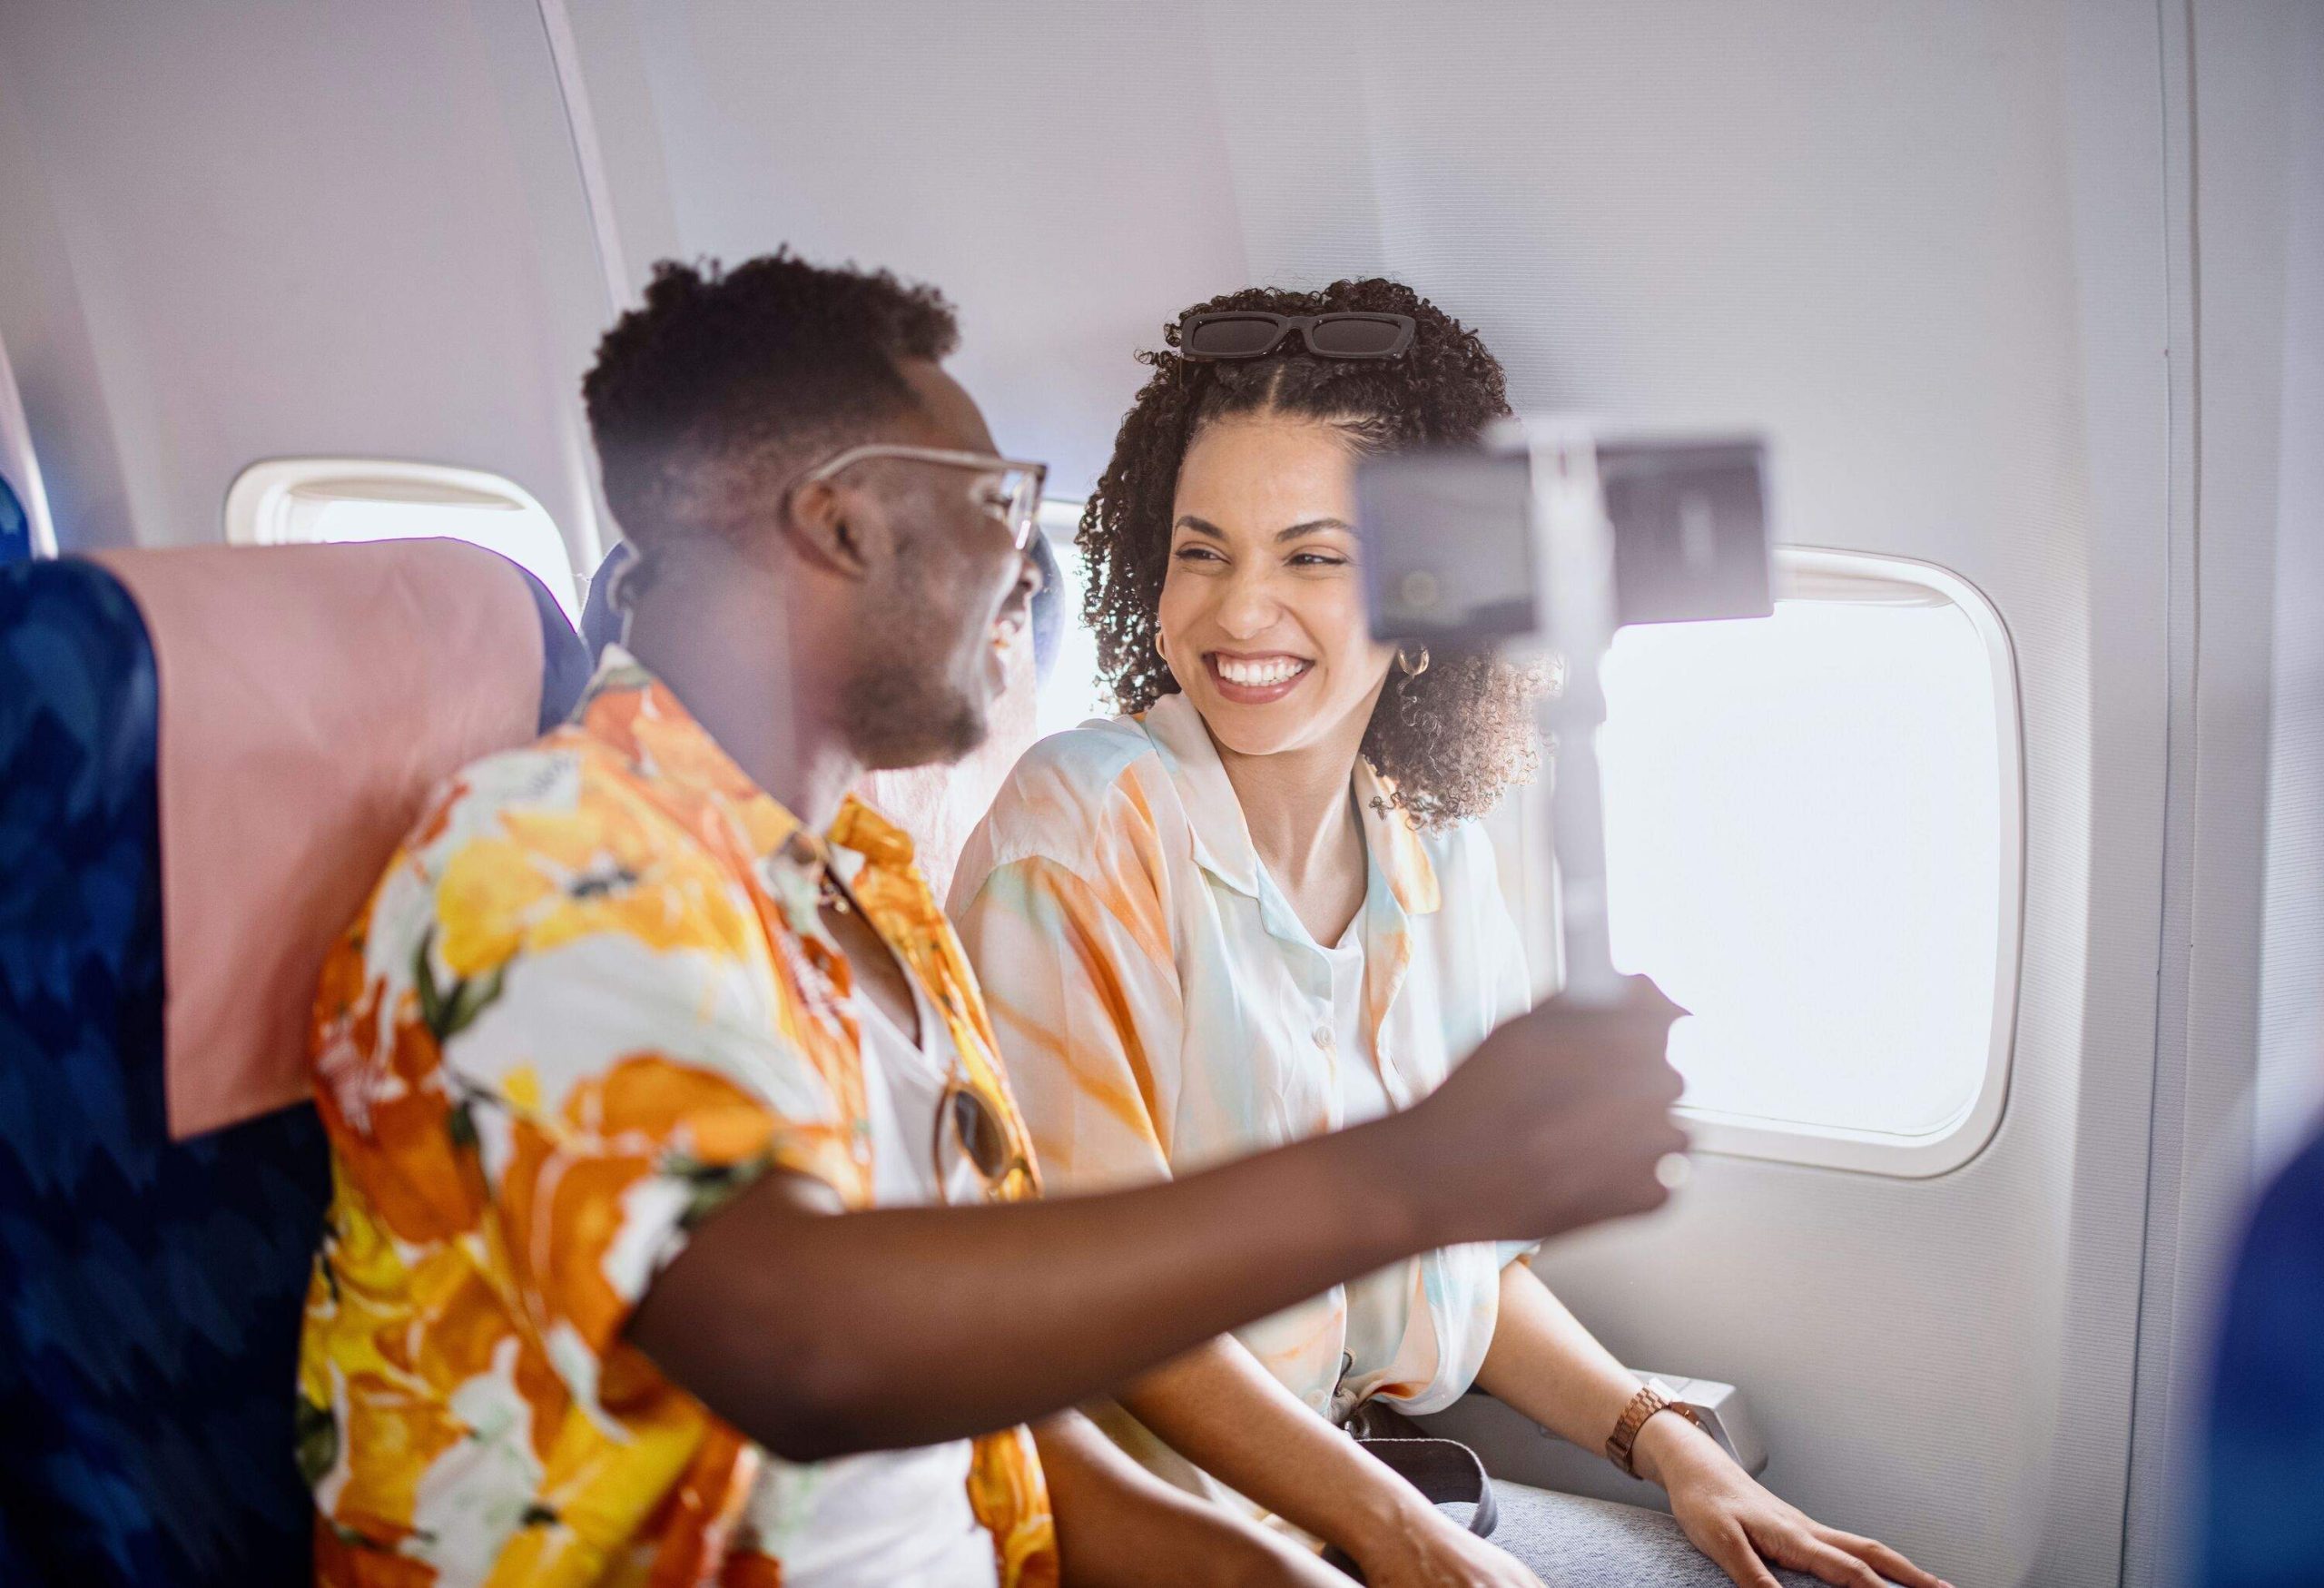 A young couple captures a memorable moment by snapping a cheerful selfie while seated together inside an airplane.